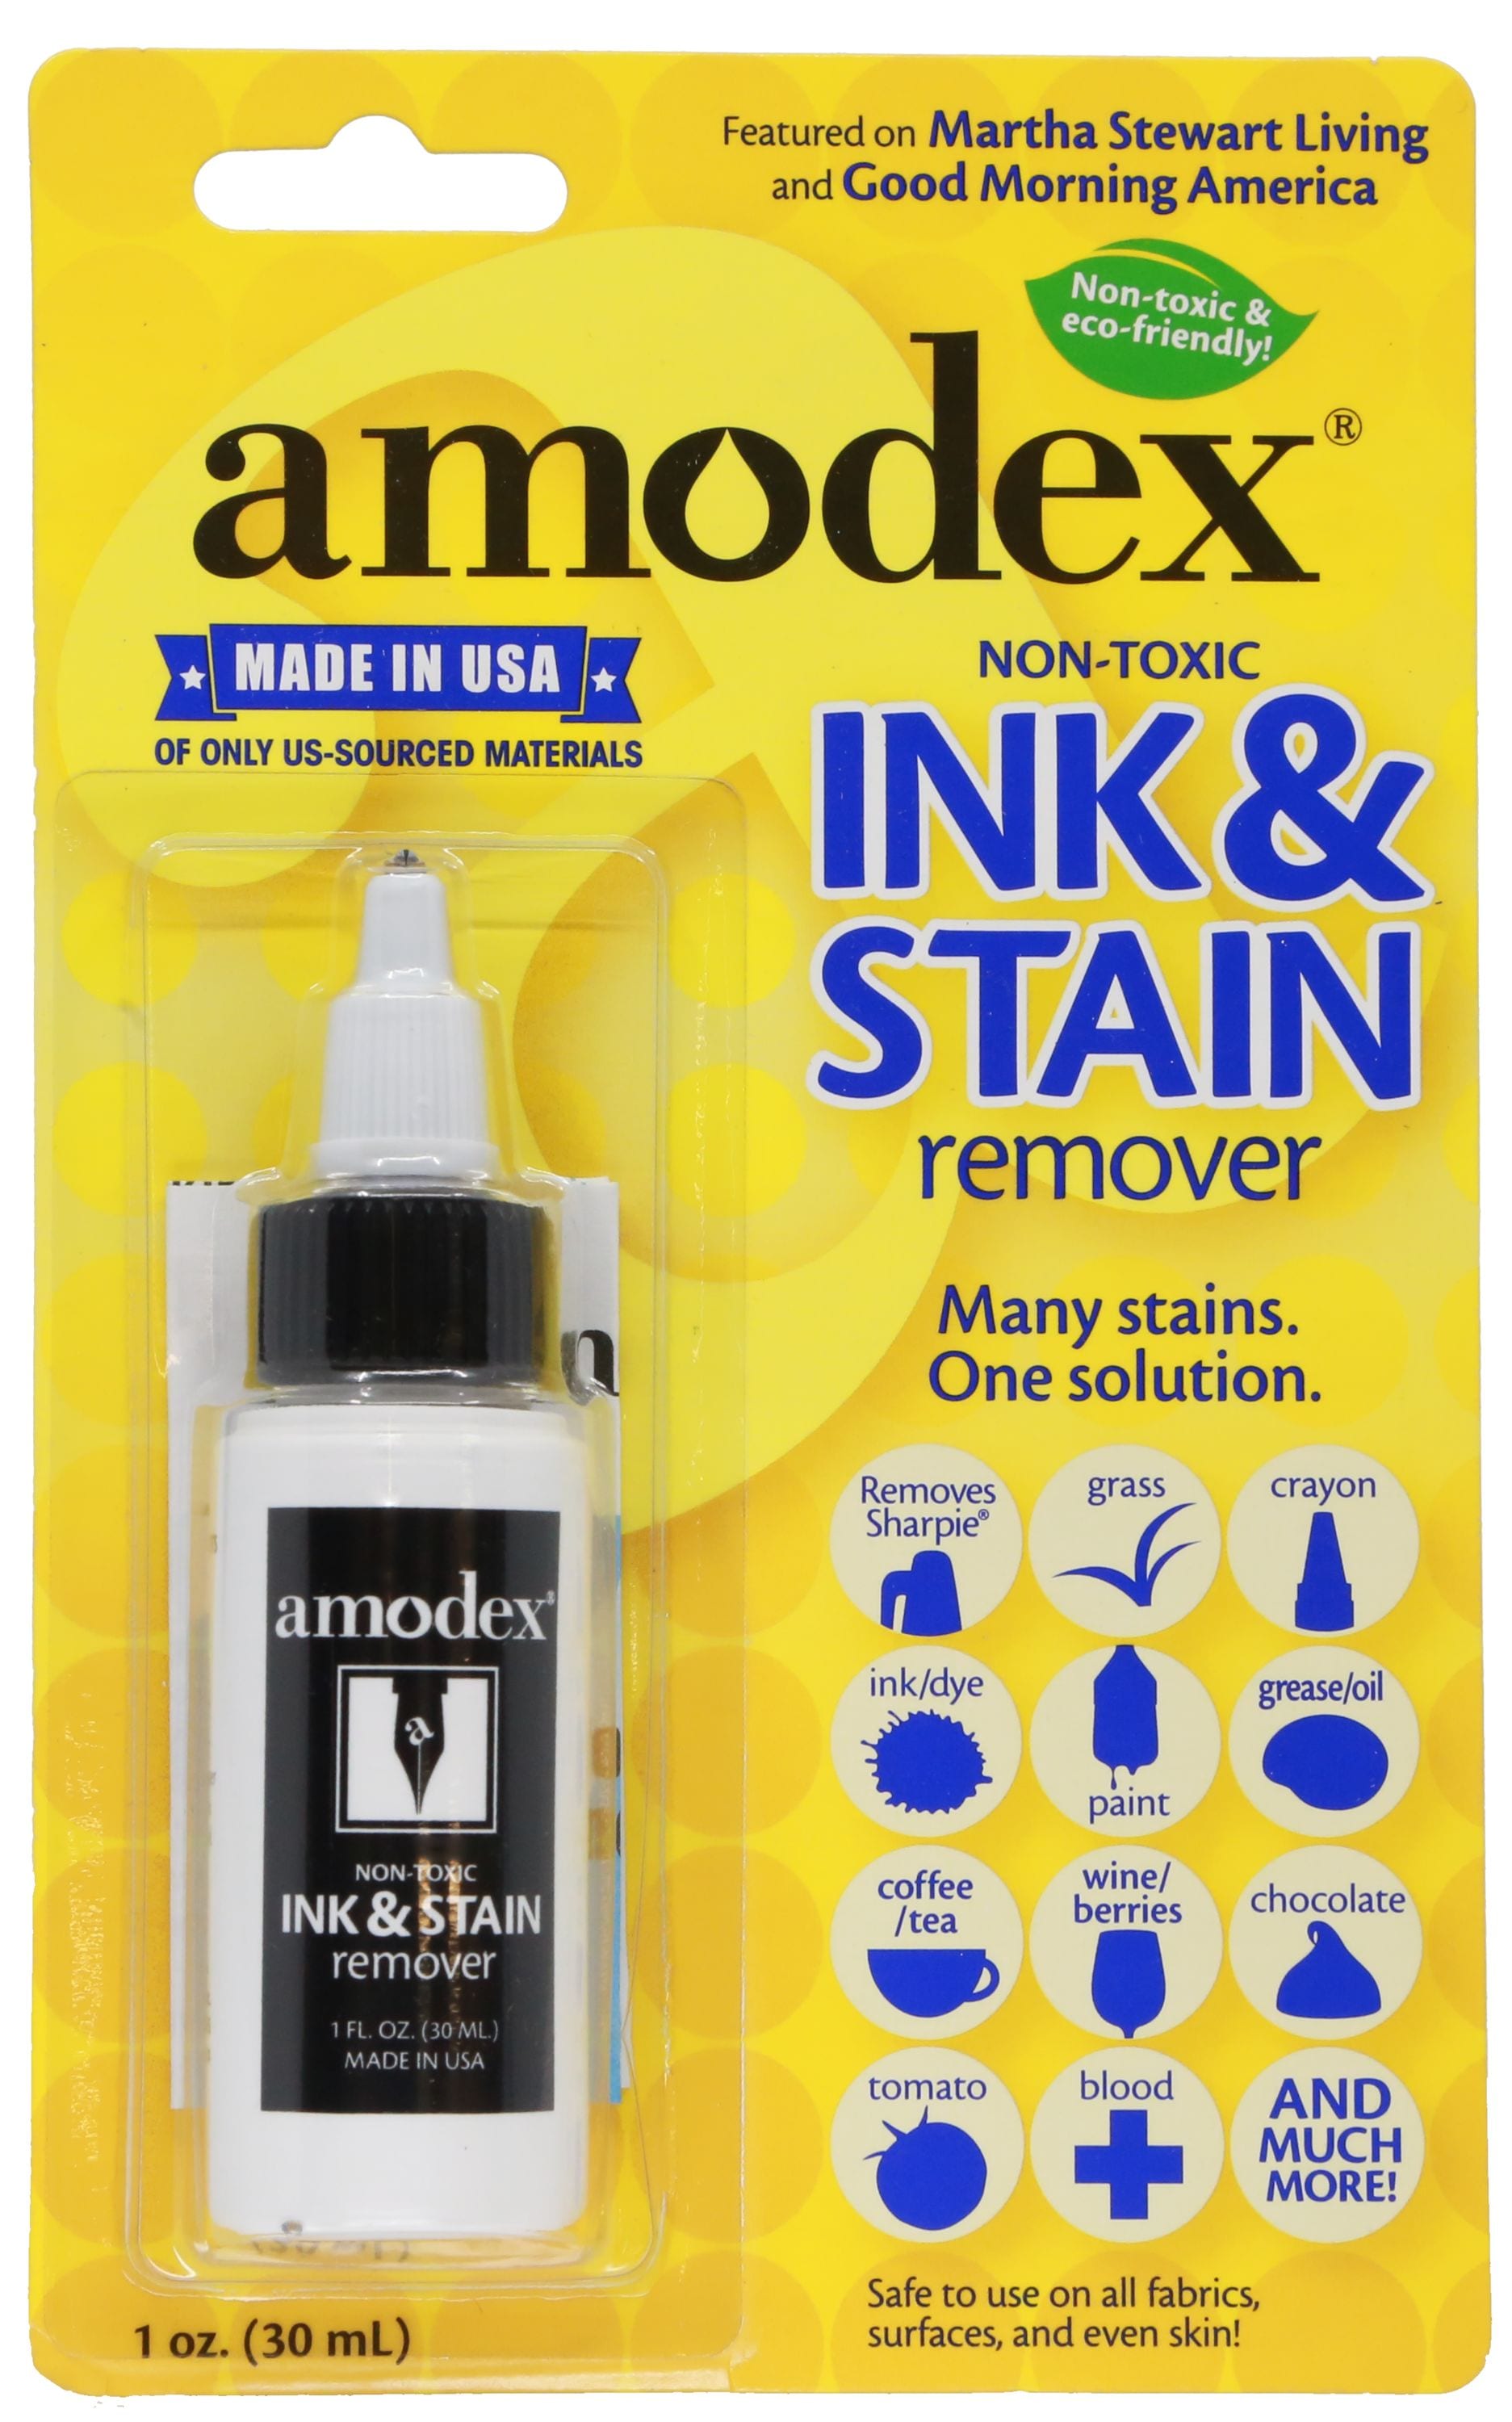 Amodex 1-Fl Oz Ink and Stain Remover | Safe for All Fabrics | Removes  Sharpie, Food, Grease, Grass | Non-Toxic Soap Formula | Clean & Fresh Scent